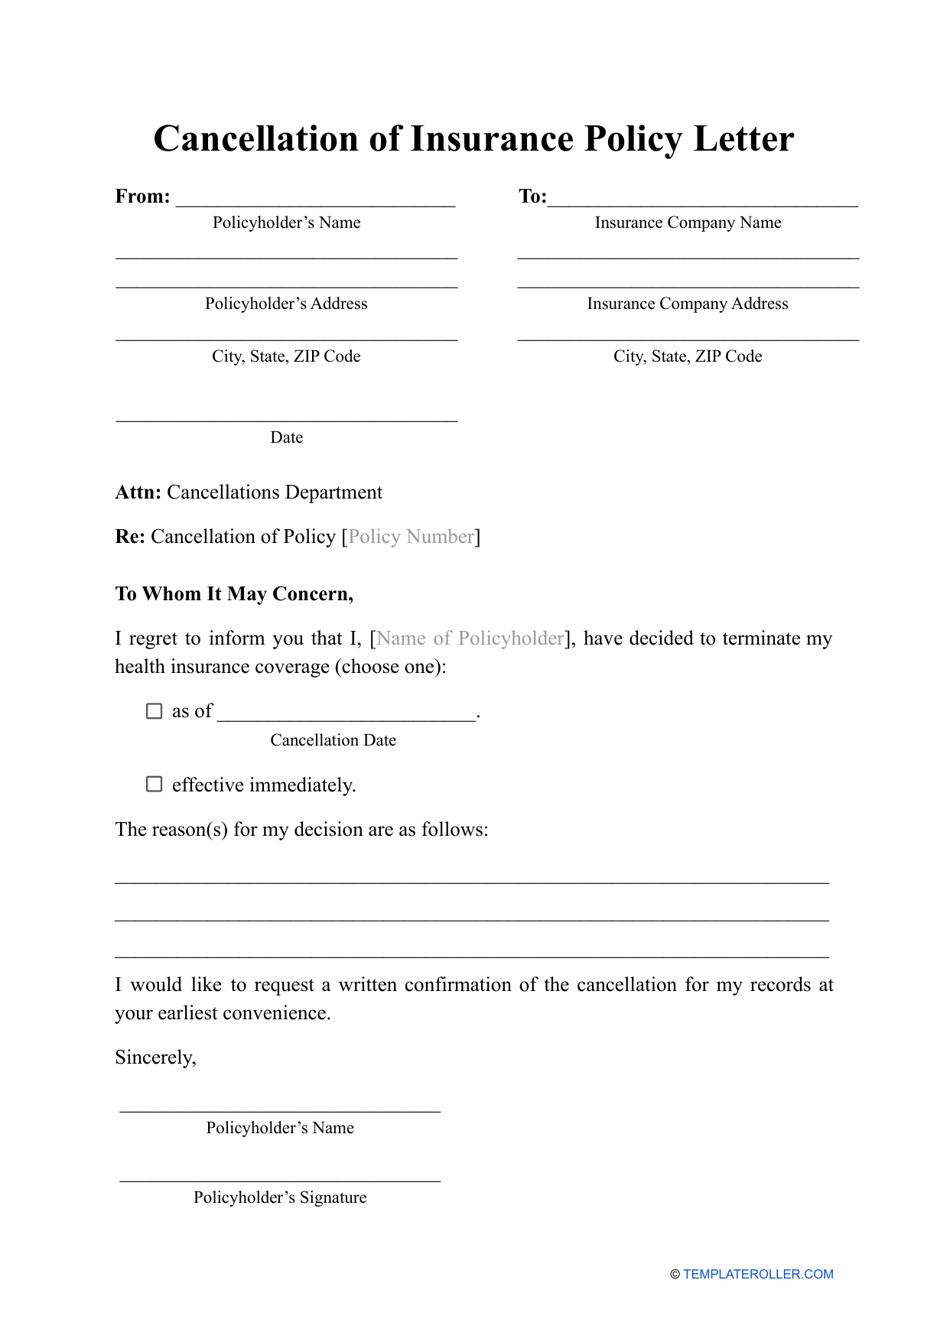 cancellation-of-insurance-policy-letter-template-download-printable-pdf